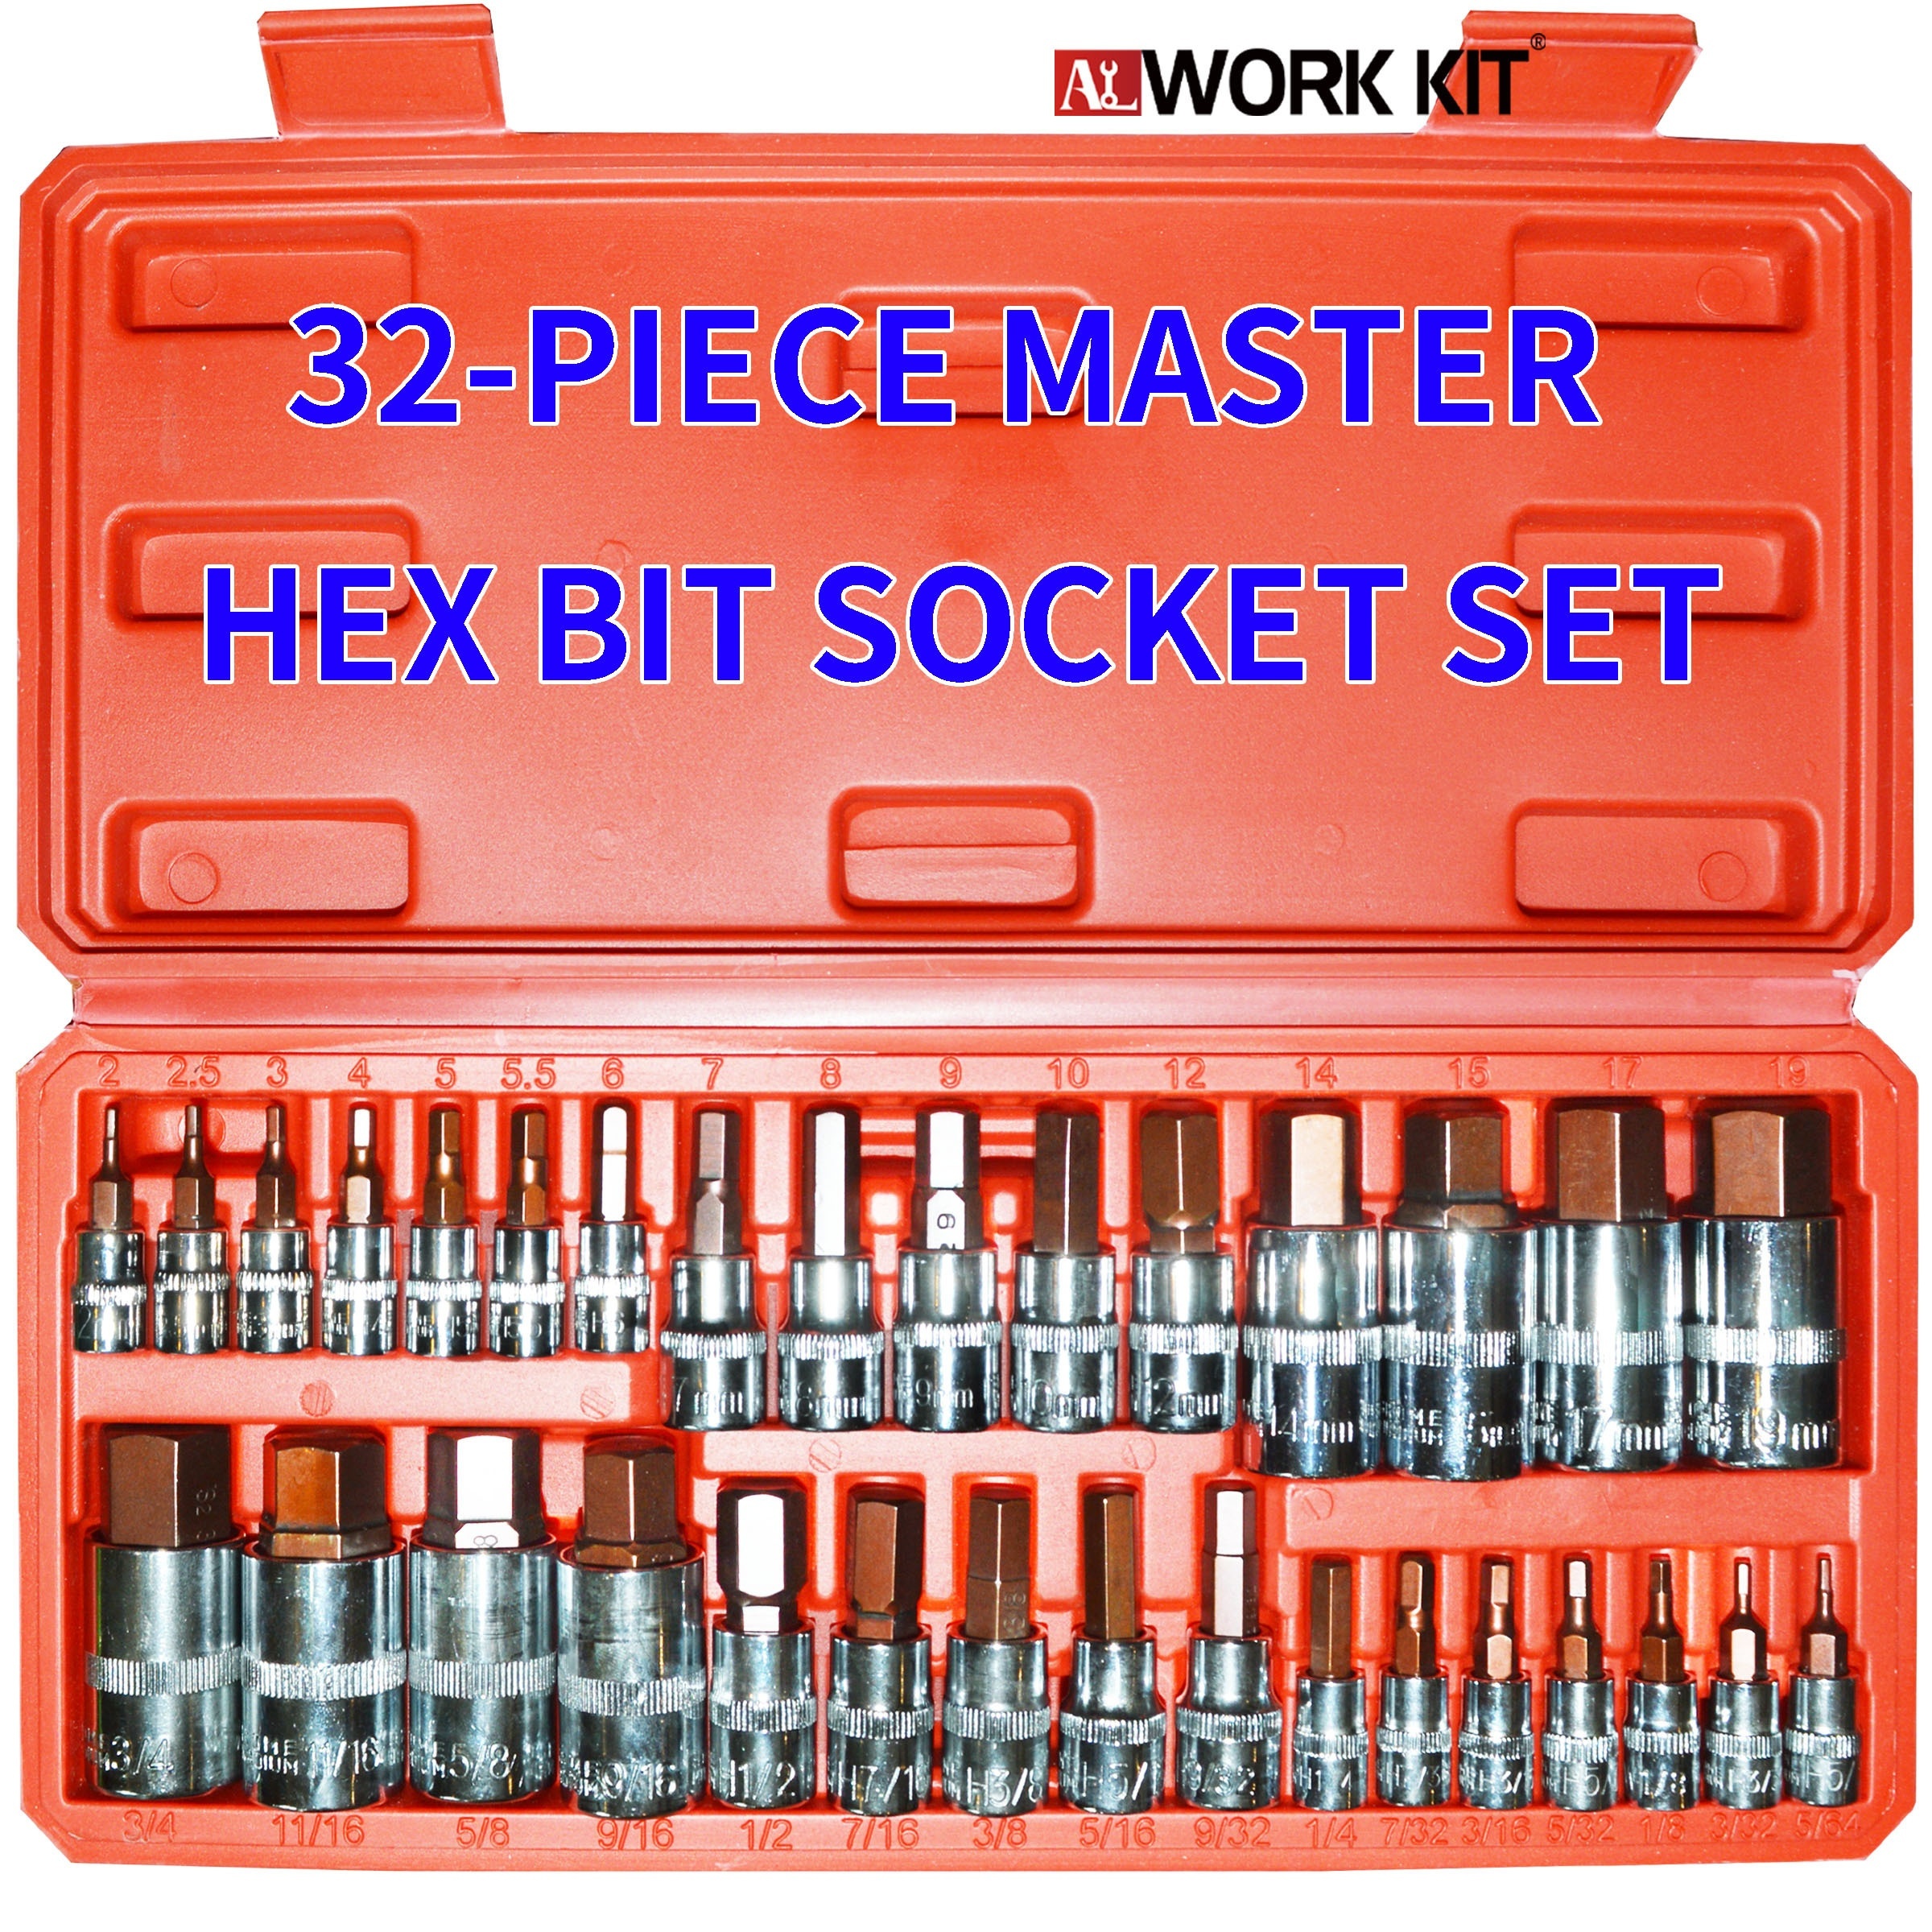 ABN Hex Socket Set - 32Pc Universal SAE and Metric Allen Socket Set Hex Bit  Socket Set, 5/64 to 3/4 Inch and 2 to 19mm